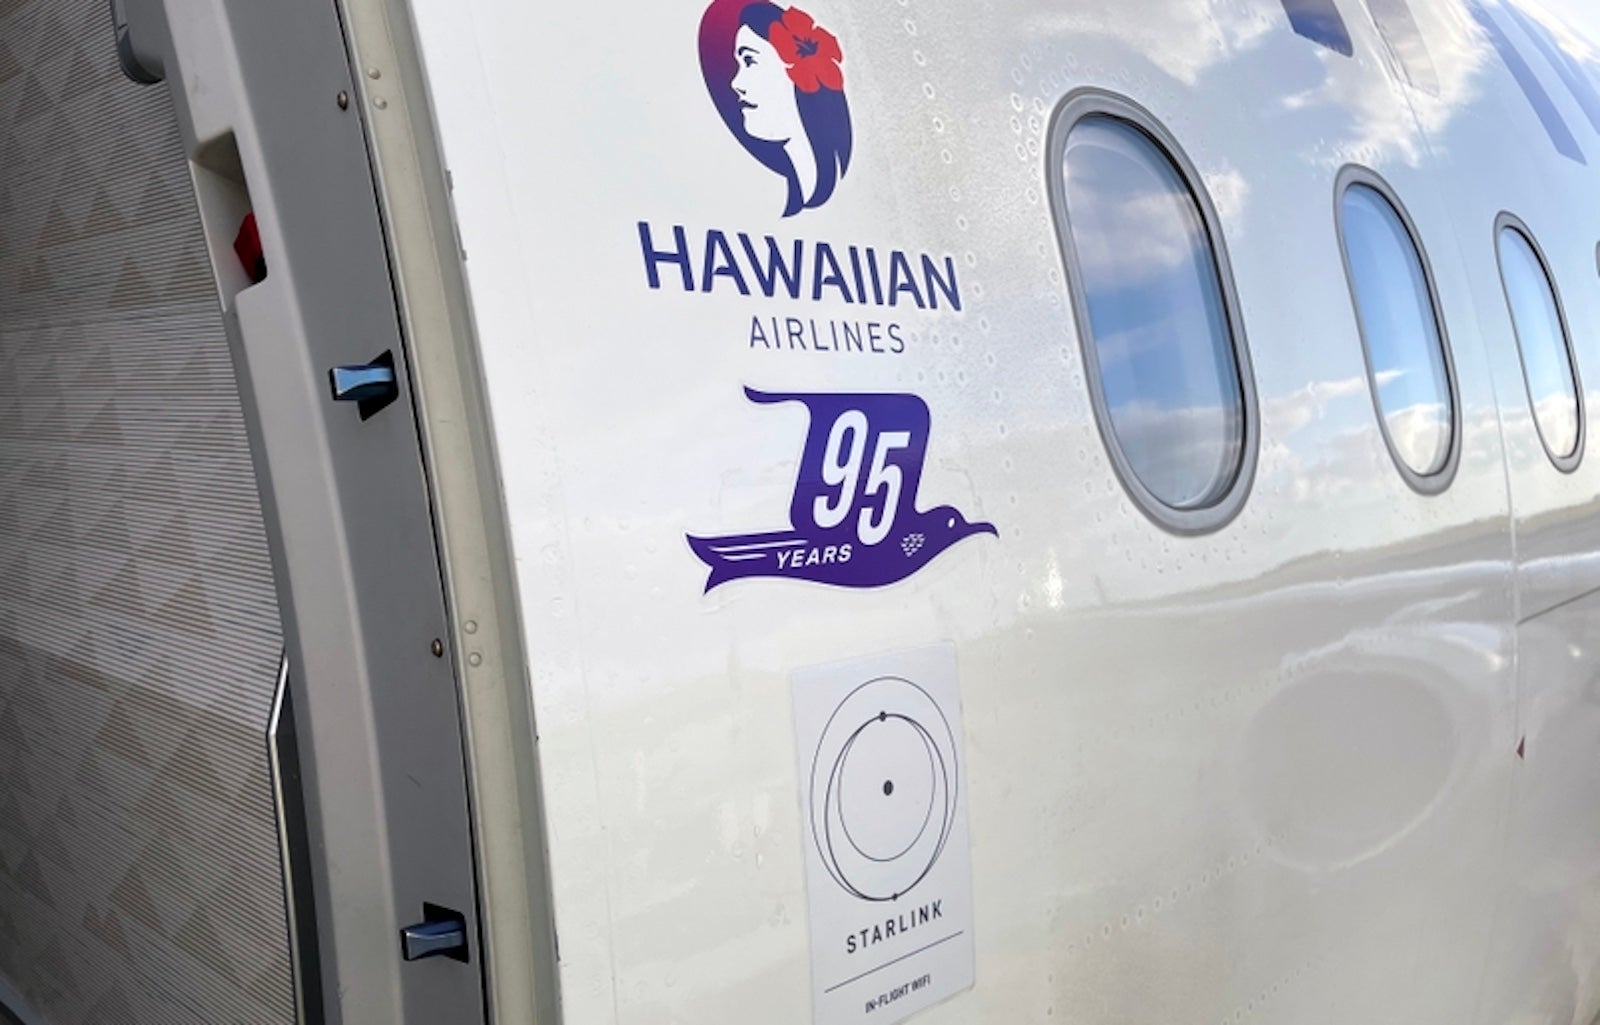 A Hawaiian Airlines Airbus A321neo outfitted with a Starlink decal